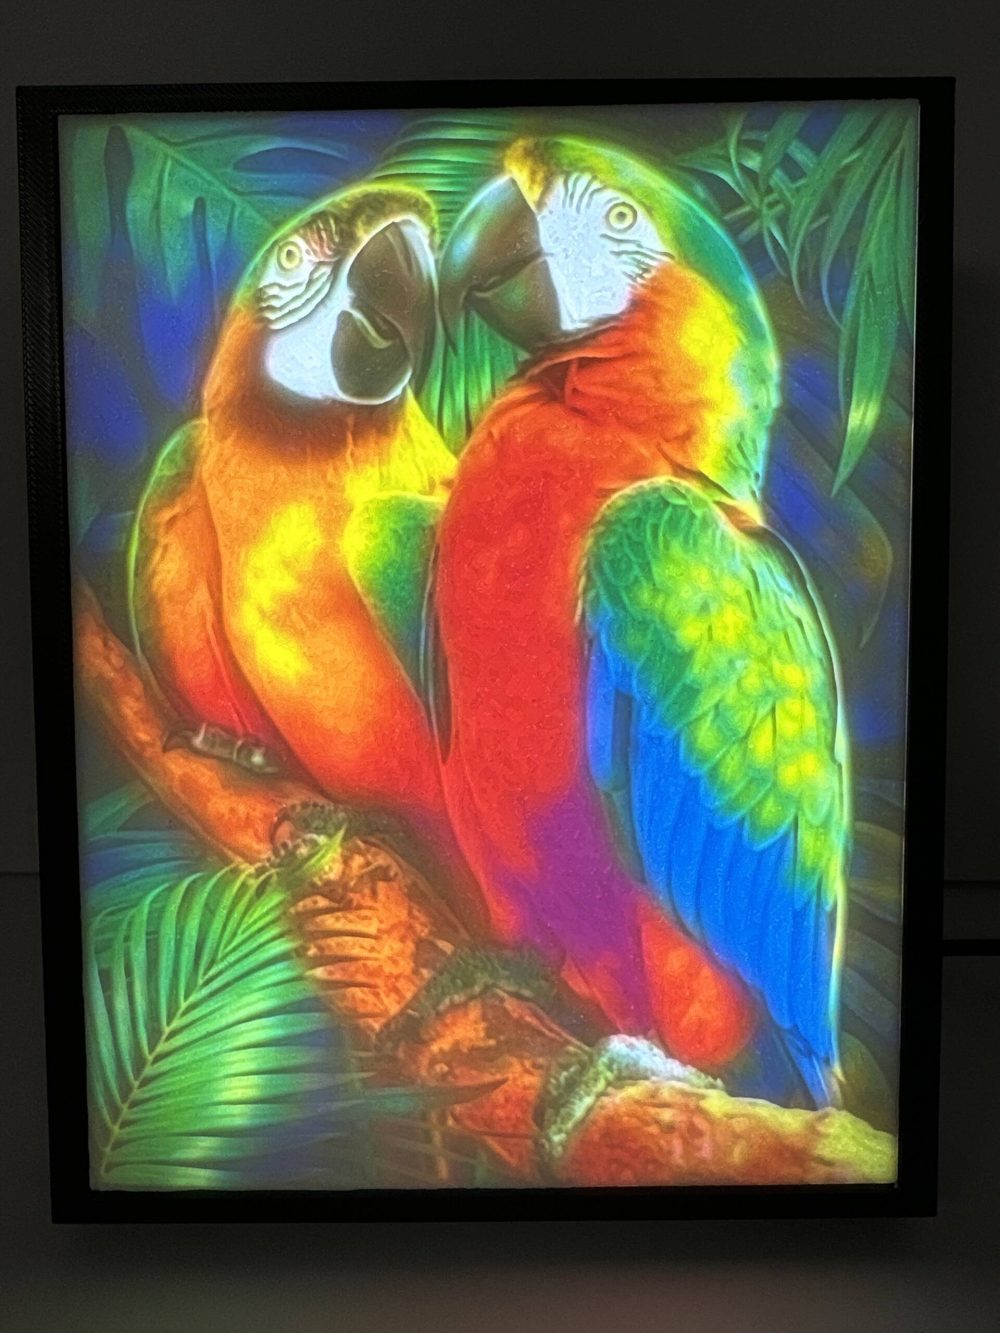 Colorful lithophane of two parrots in a tropical setting, ideal for home decor.